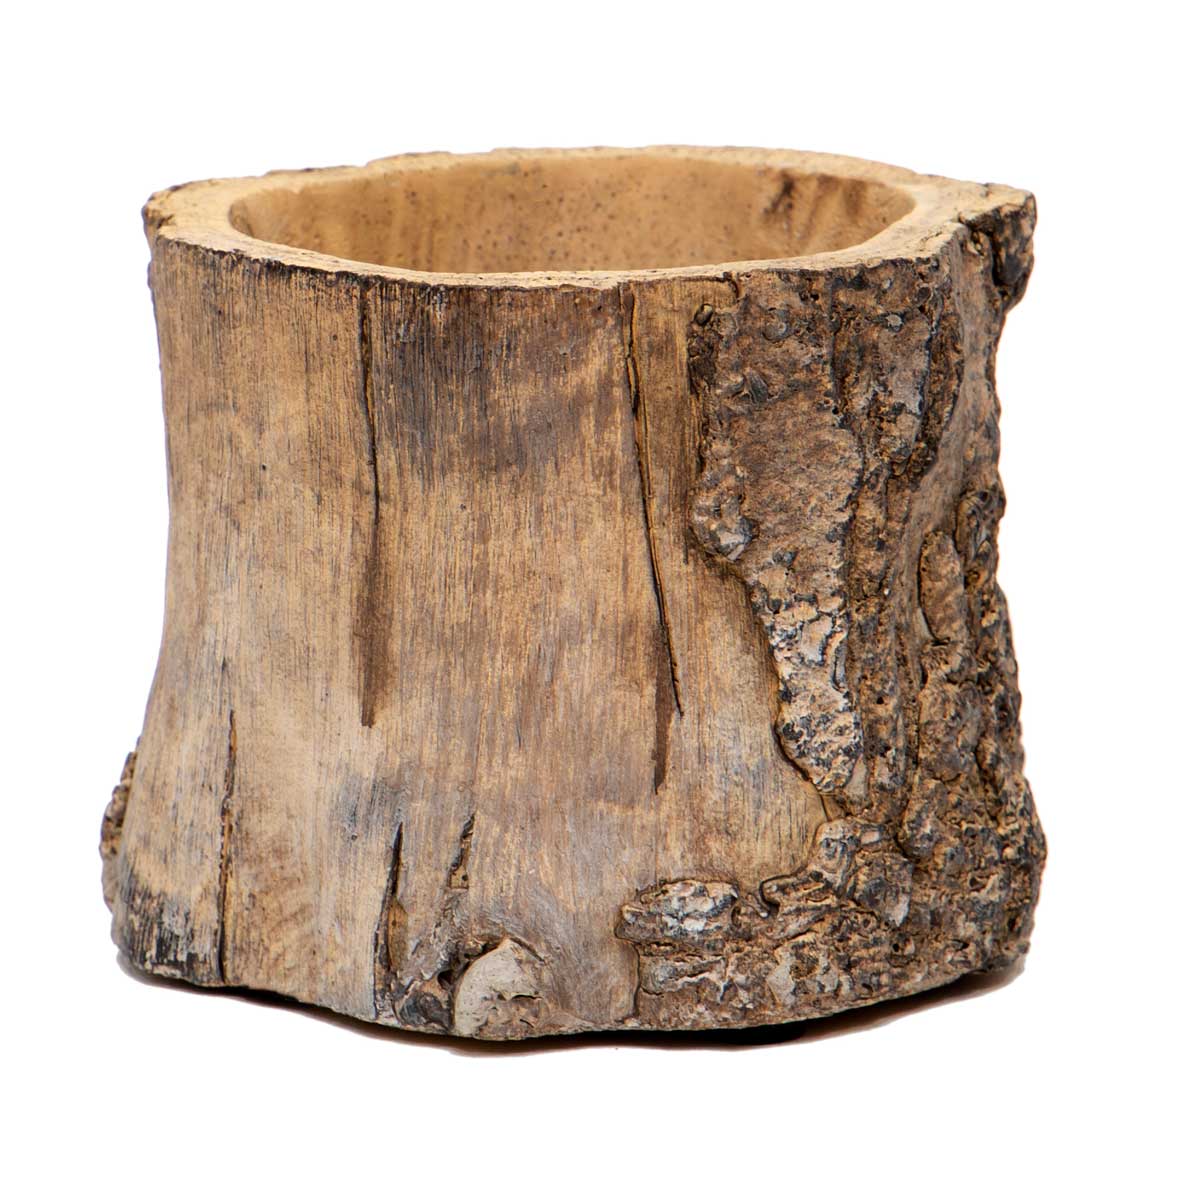 !CONCRETE LOG POT BROWN WITH BARK TEXTURE SMALL